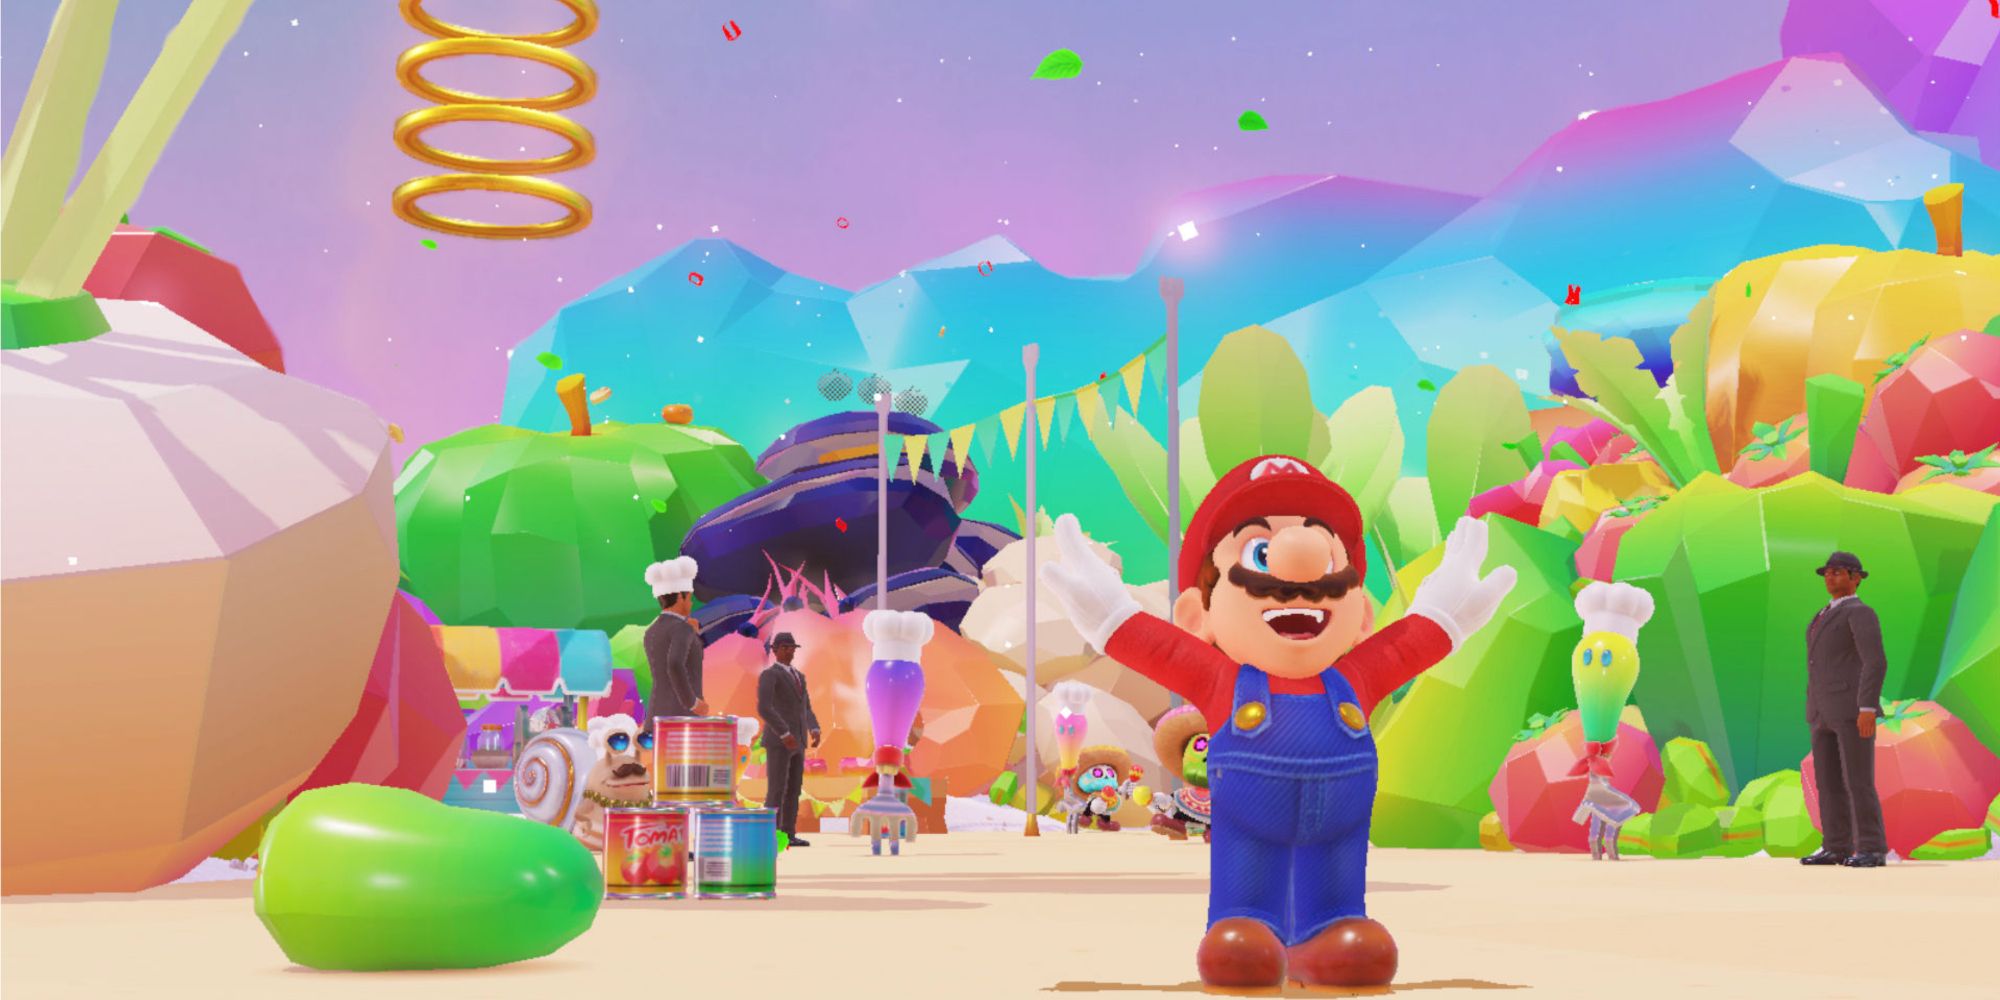 Nintendo Director Tells Fans To Stay Tuned For New Mario Games